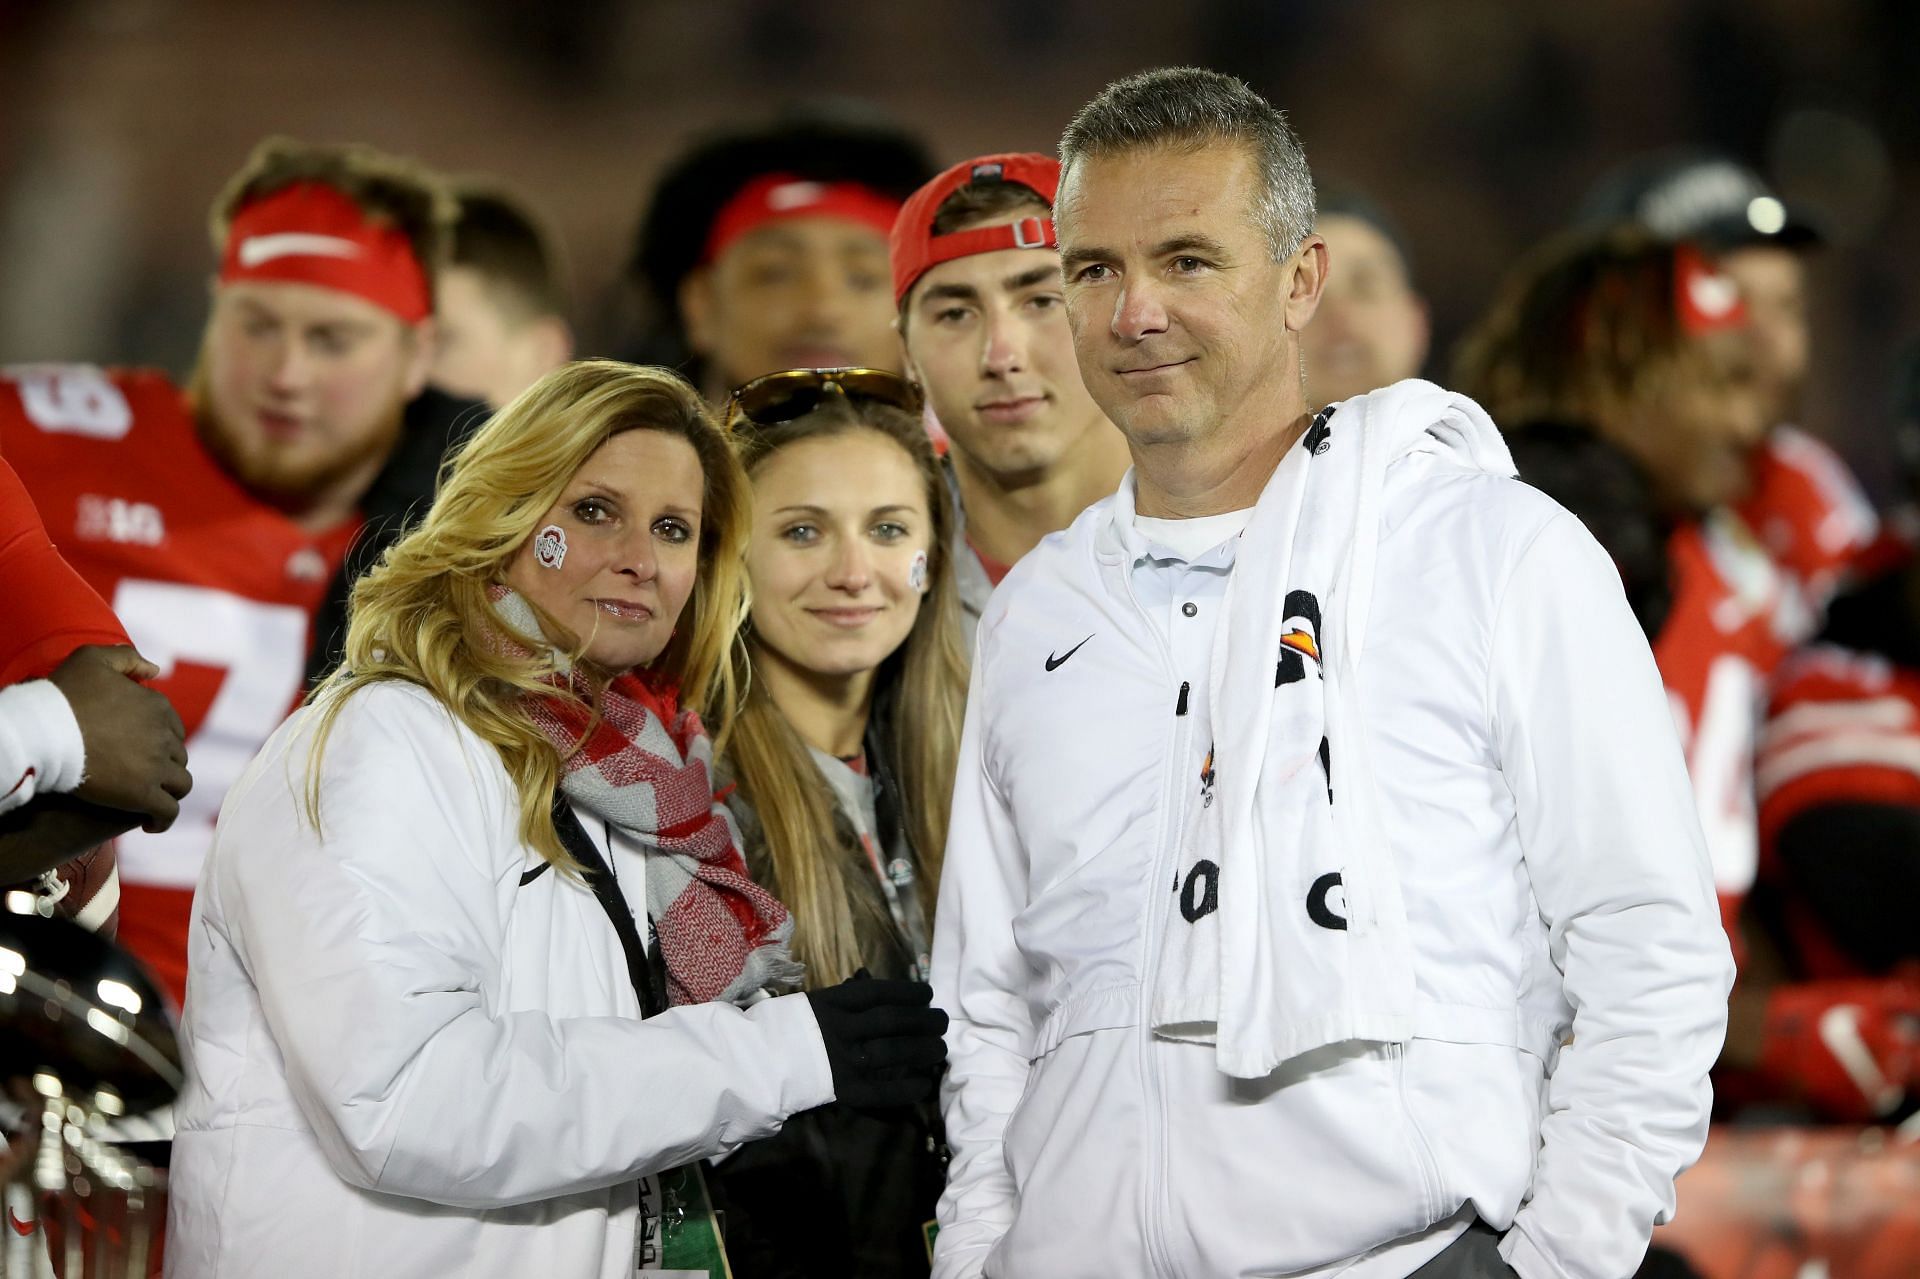 Urban Meyer with his family at Ohio State